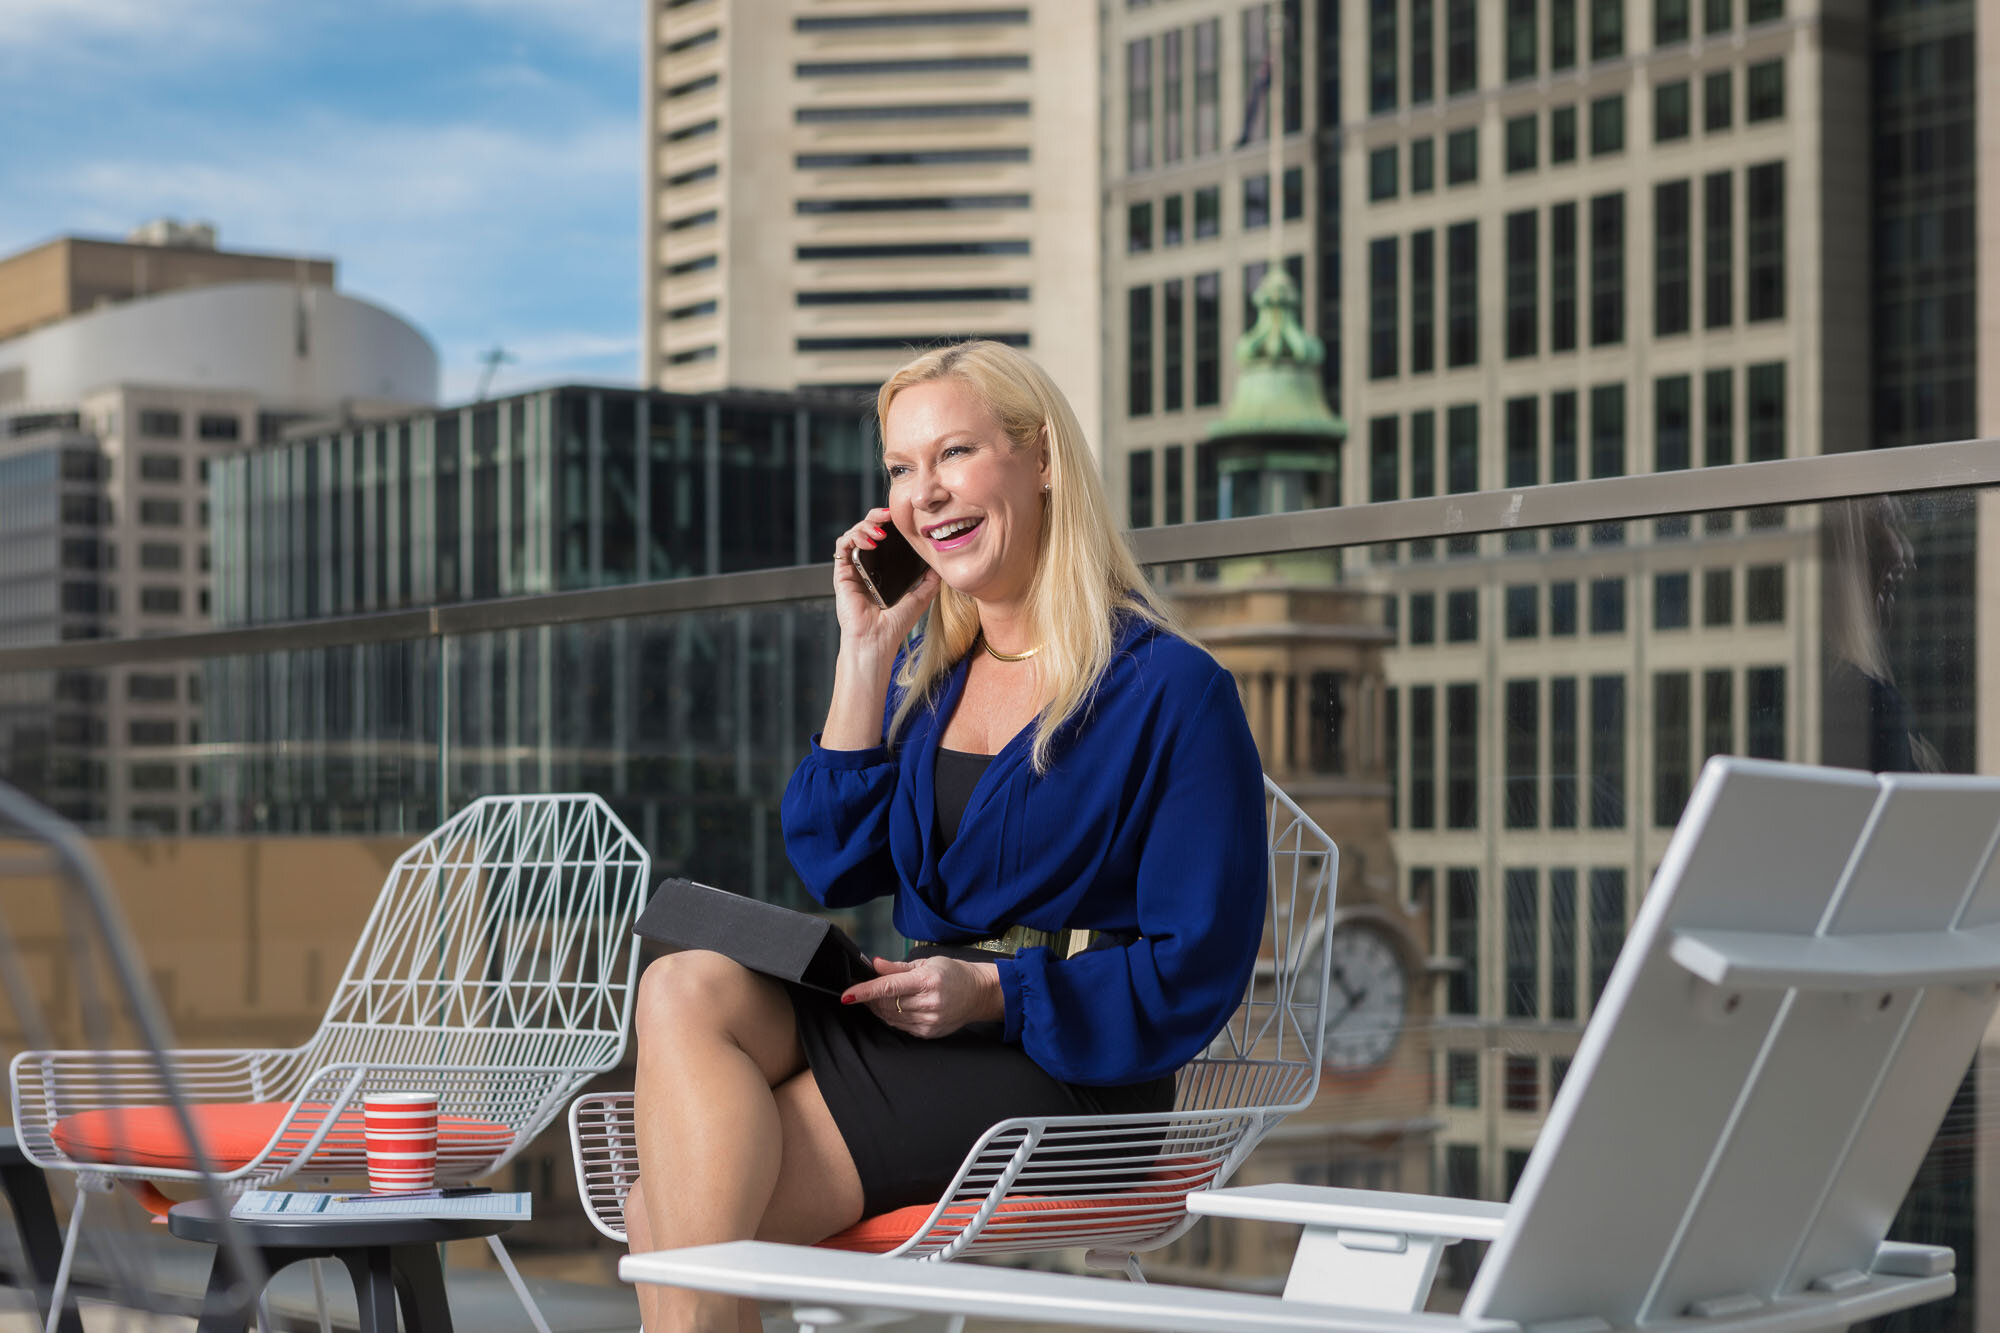 people-work-portrait-female-ceo-working-office-rooftop-cityscape-sydney